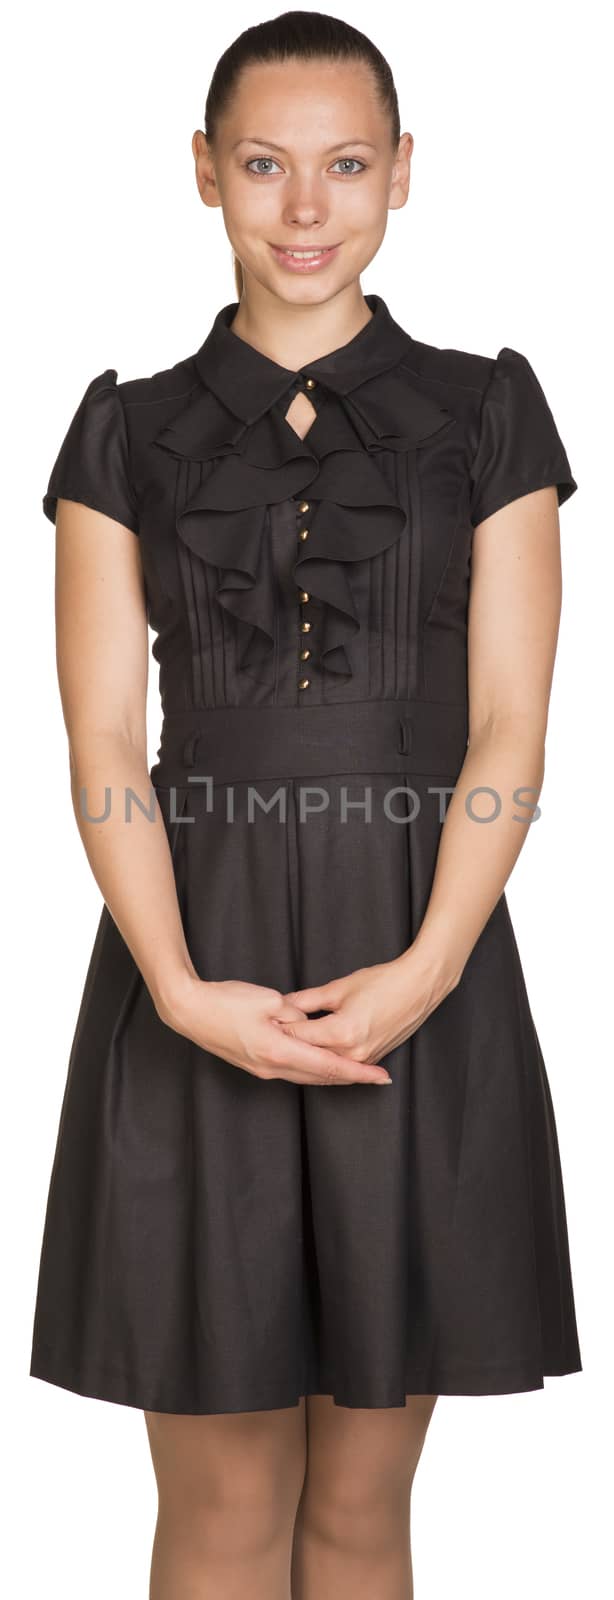 Attractive smiling young woman in black dress by cherezoff